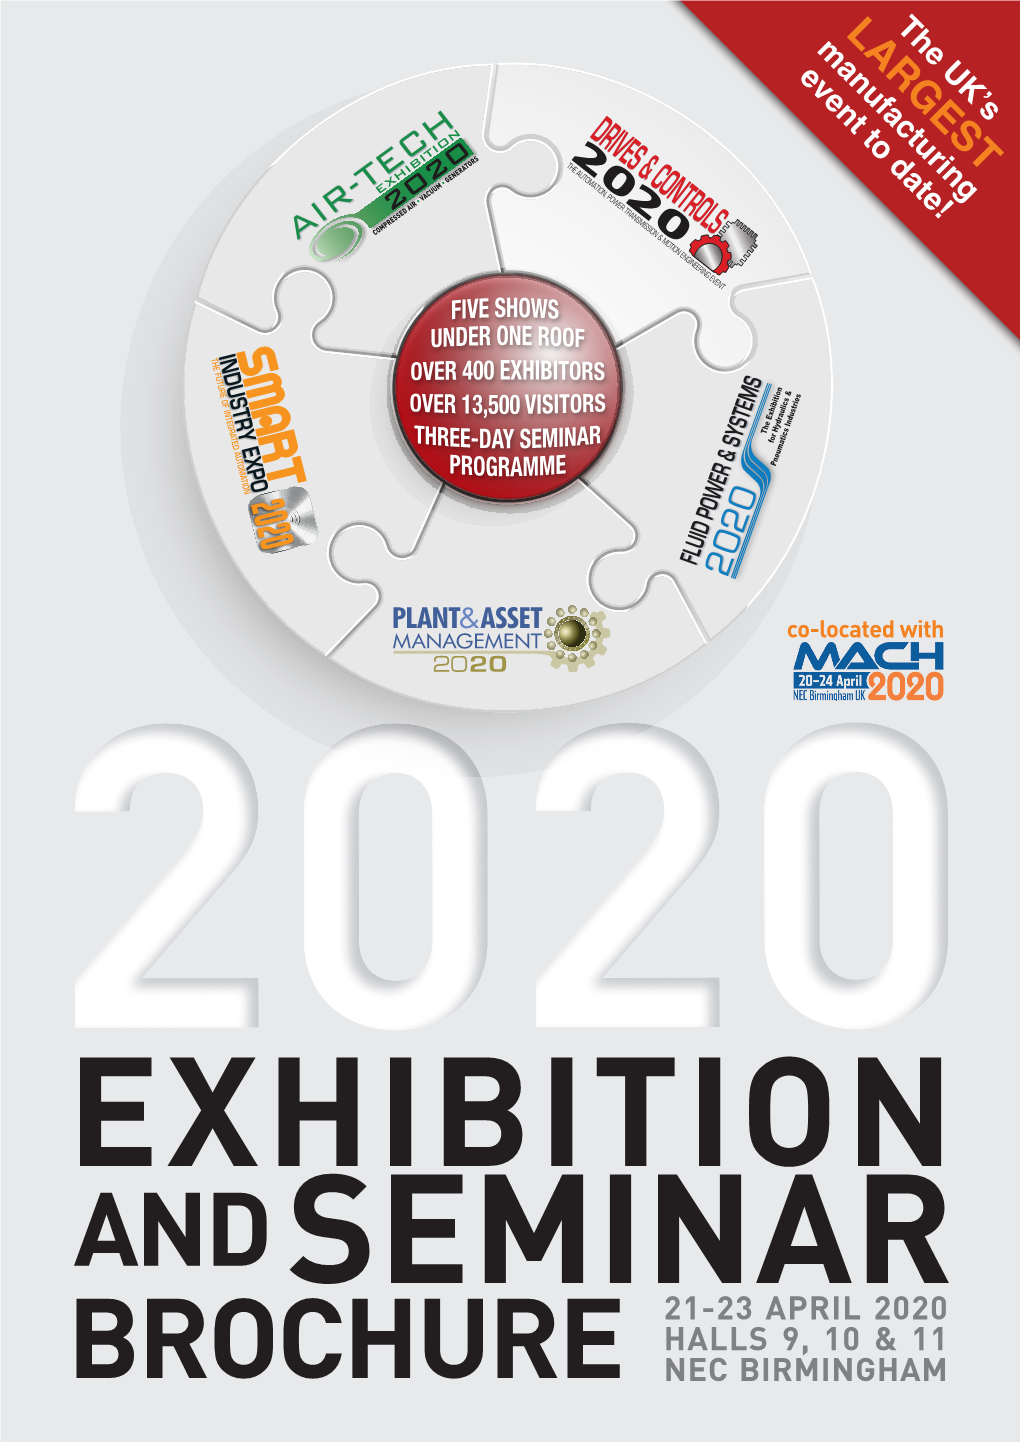 Largest Gathering of World-Class Companies Displaying and Demonstrating the Latest in Mechanical and Electro-Mechanical Equipment